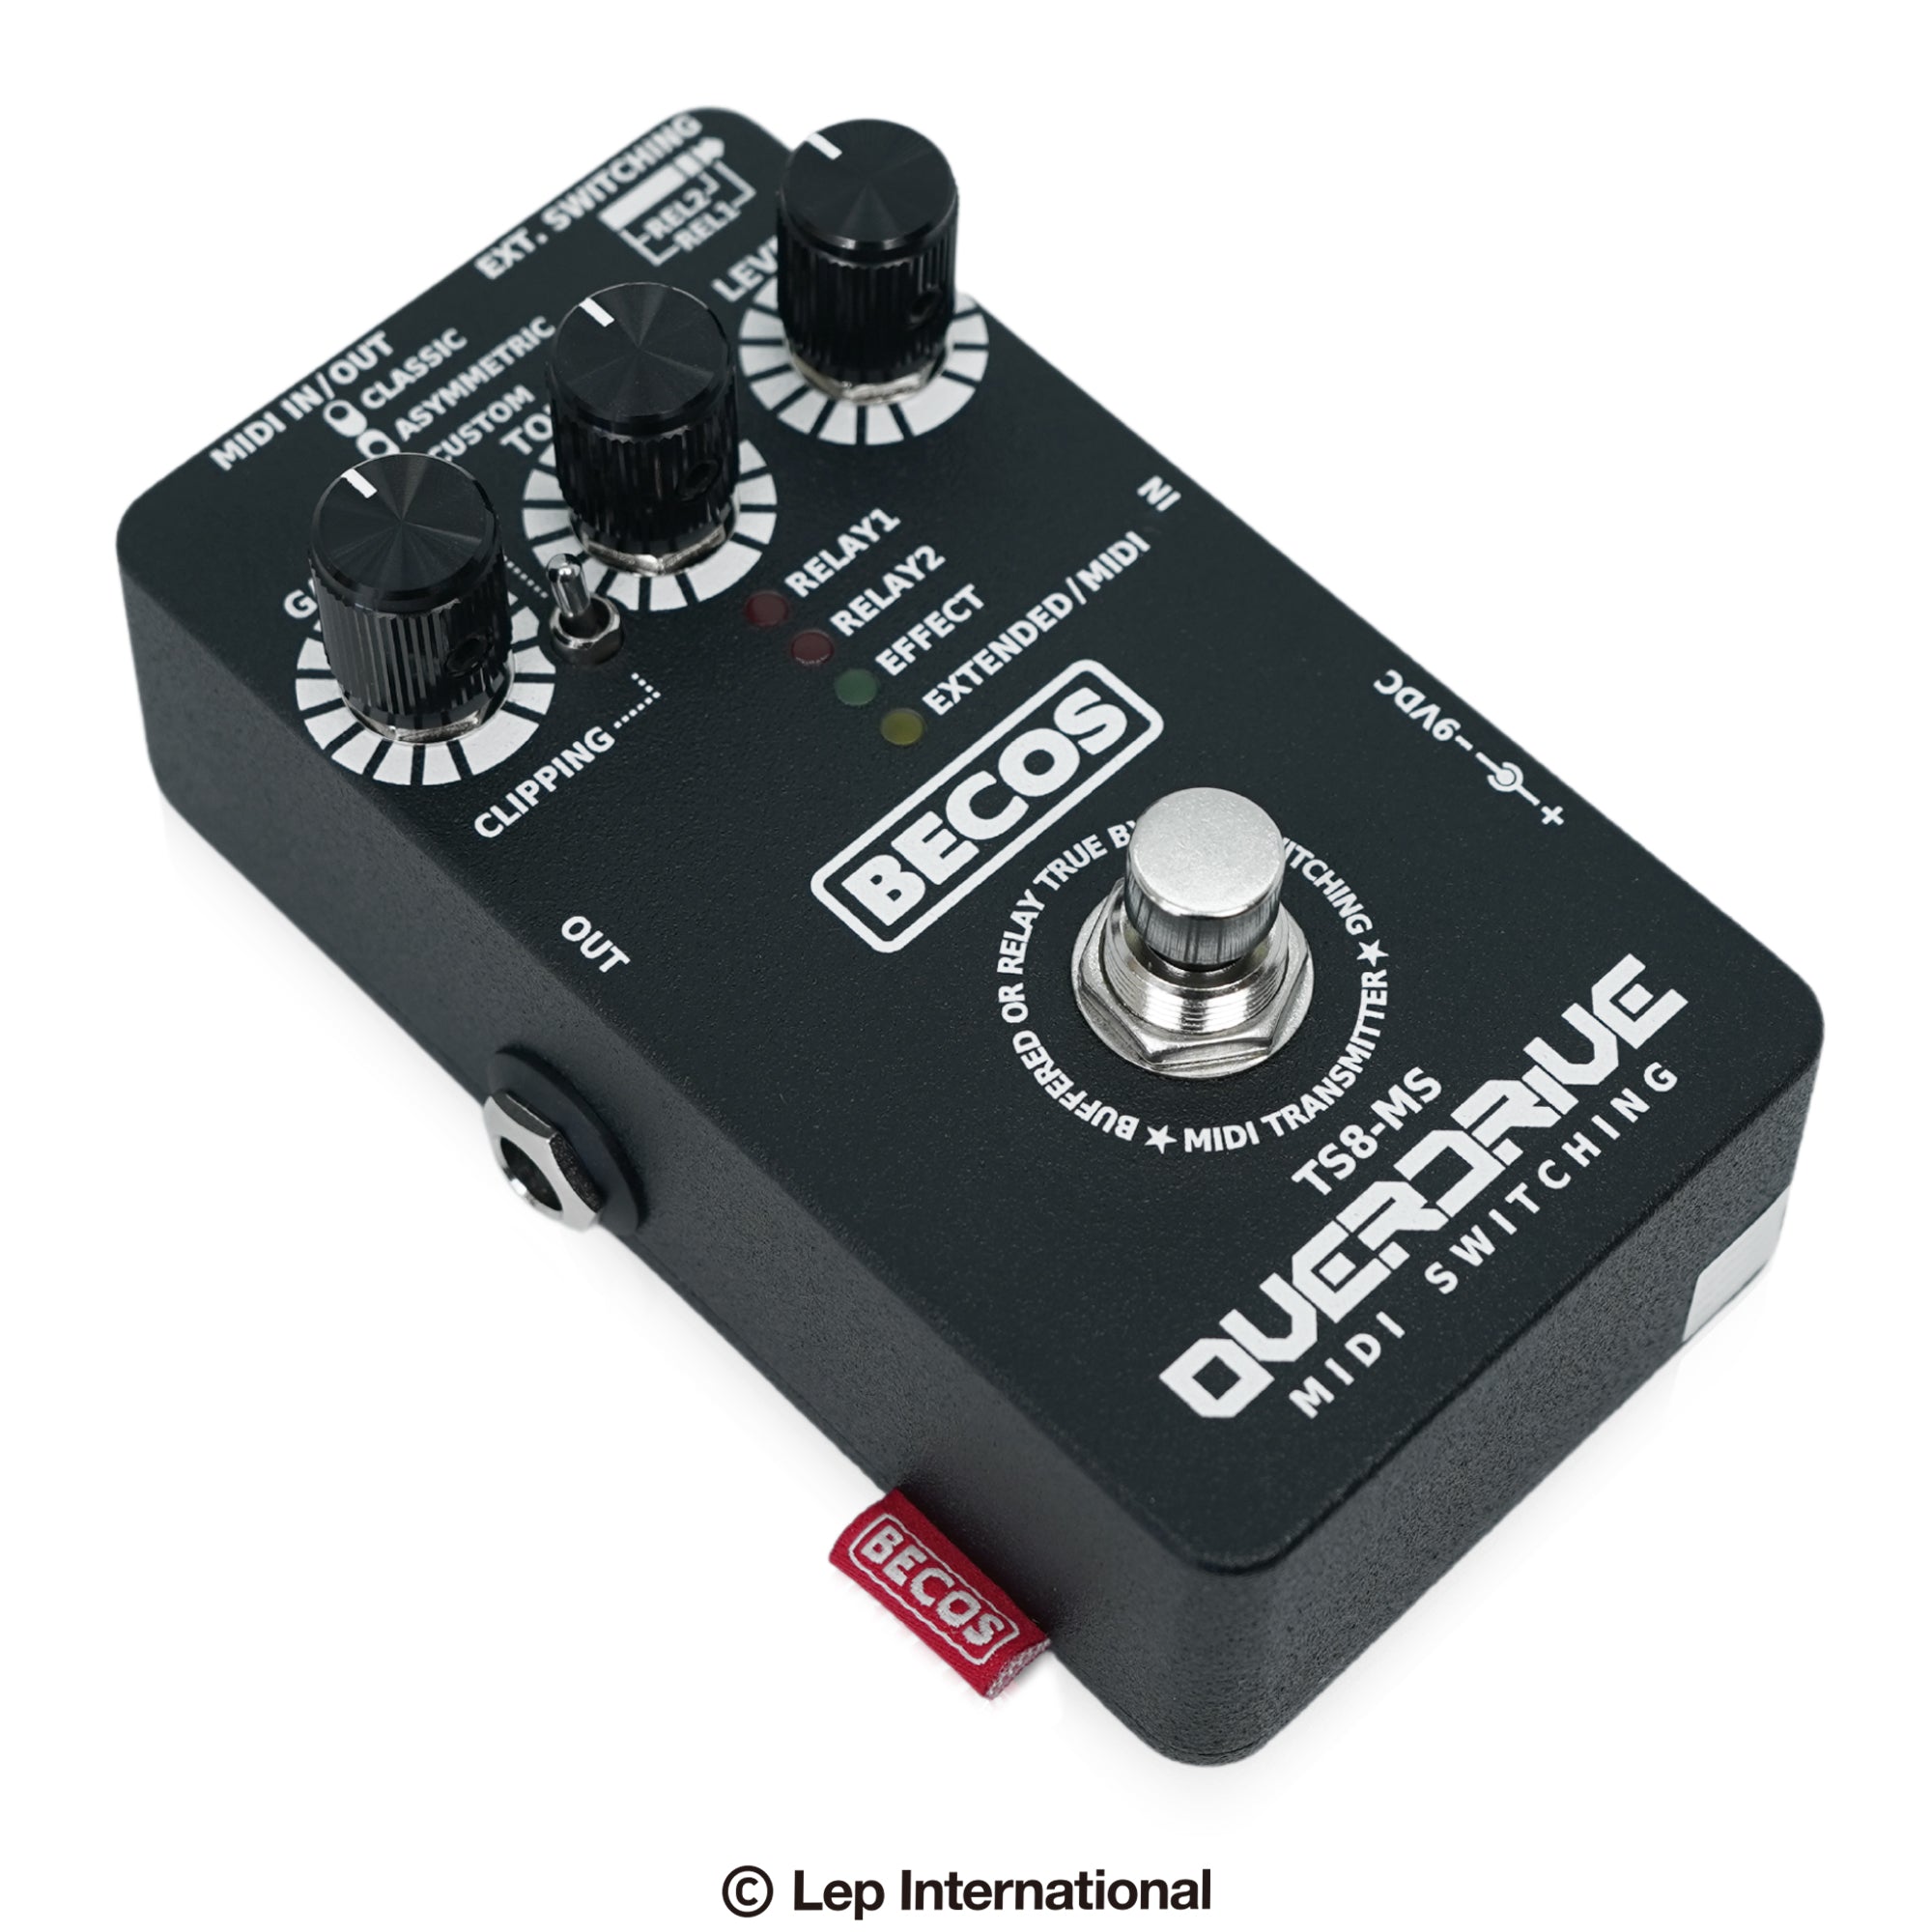 BECOS/Overdrive / MIDI Amp Channel Switcher – LEP INTERNATIONAL